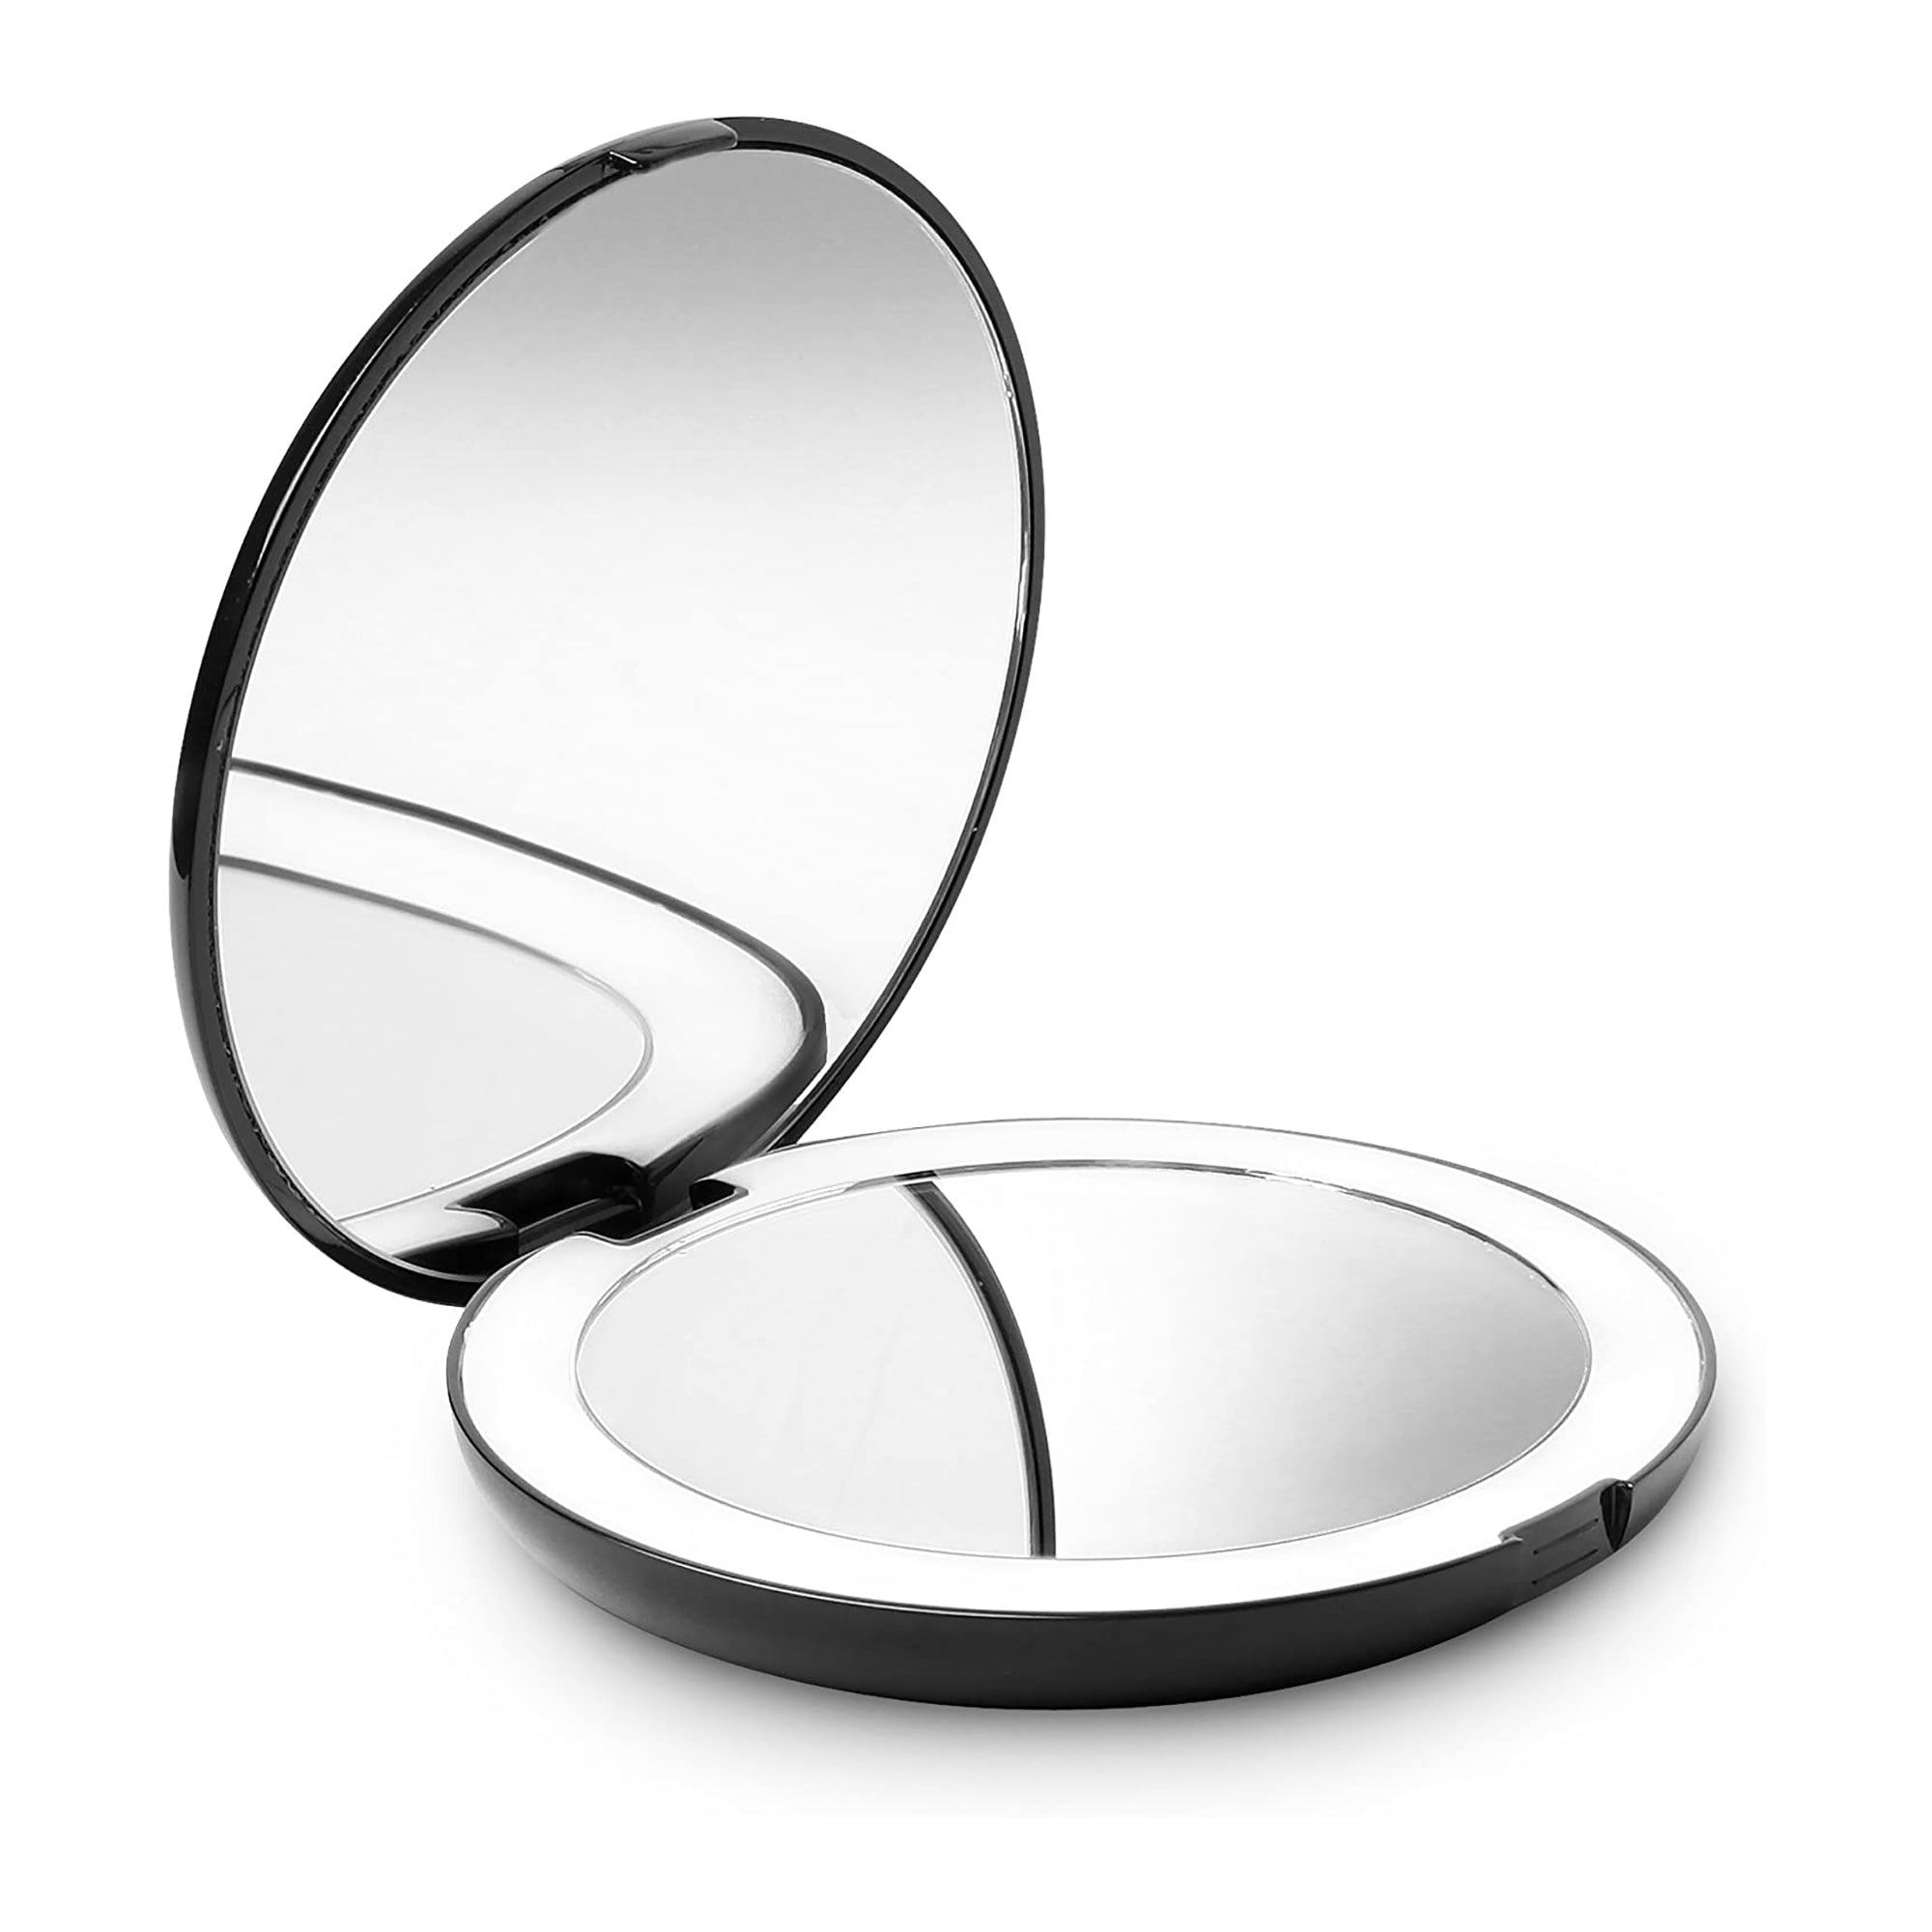 Fancii Lumi 5" Compact Mirror with LED Lights / Black / Swatch